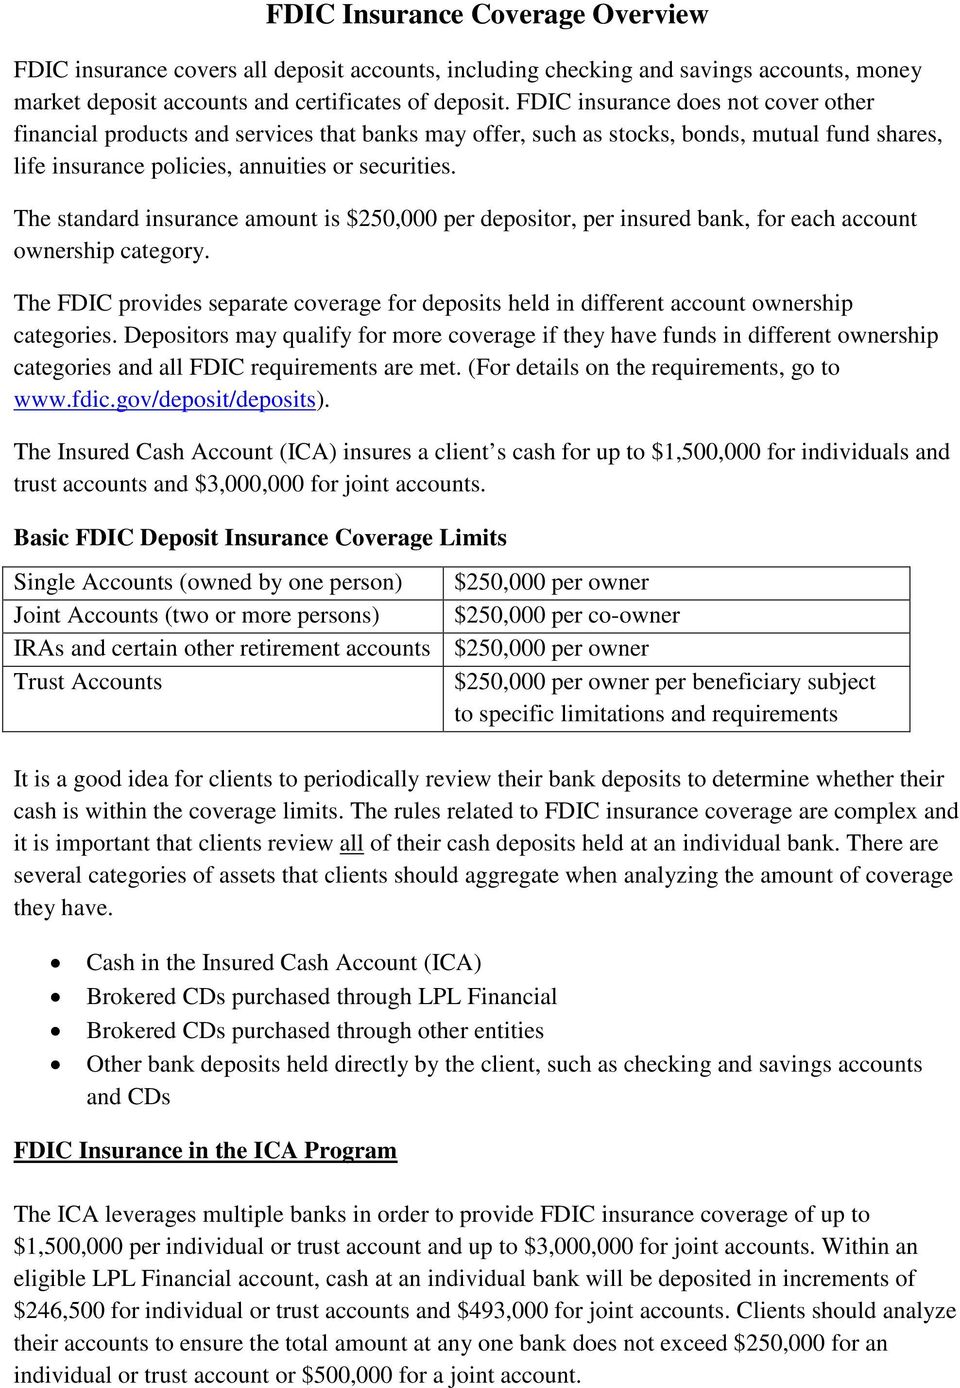 Fdic Insurance Coverage Overview Pdf Free Download